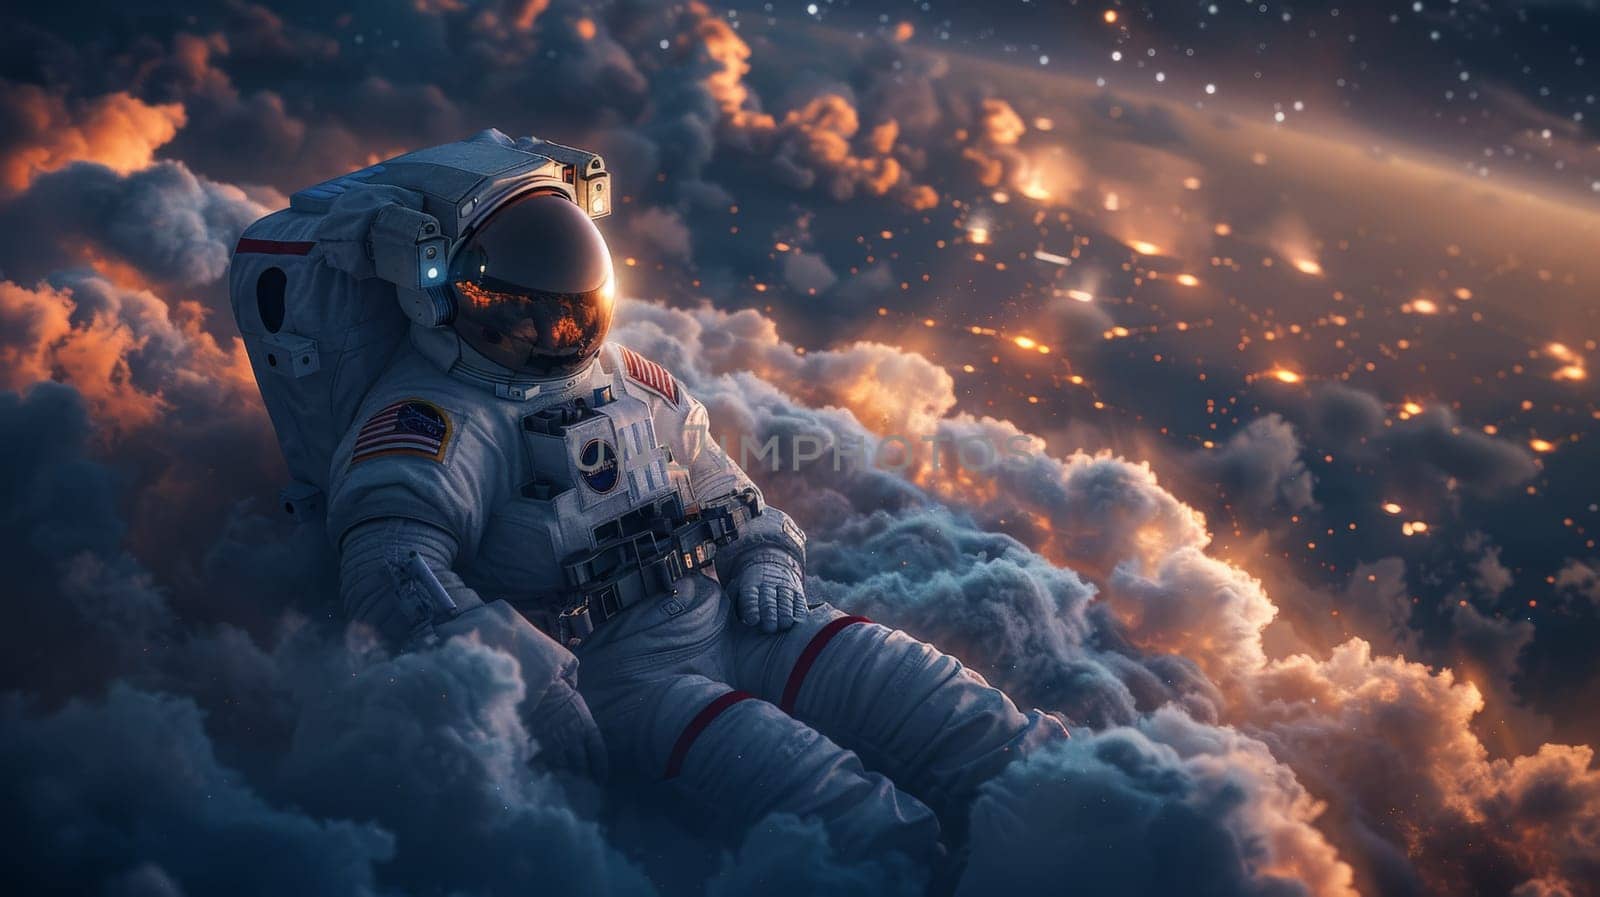 An astronaut lie on the clouds, flying over a city in a starry magic night.